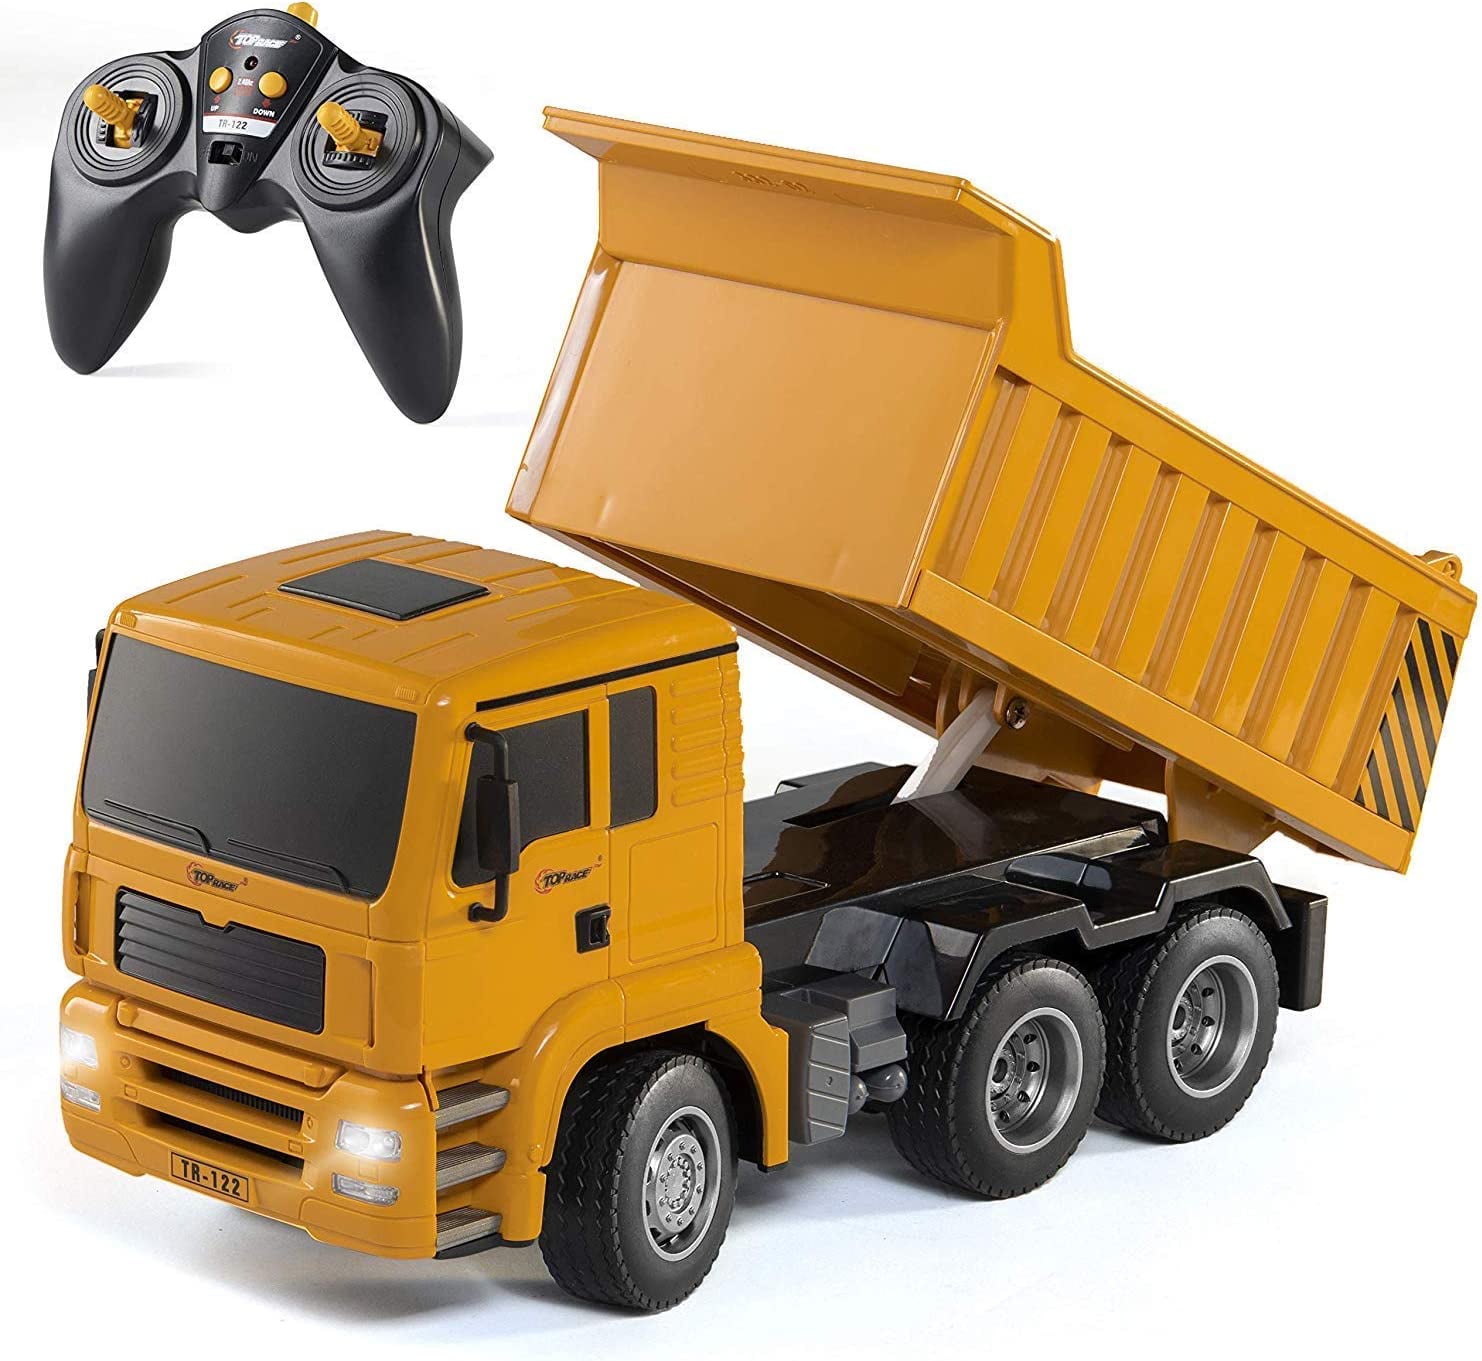 Fistone RC 6 CH 2.4g Remote Control Dump Truck 4wd Mine Construction Vehicle for sale online 